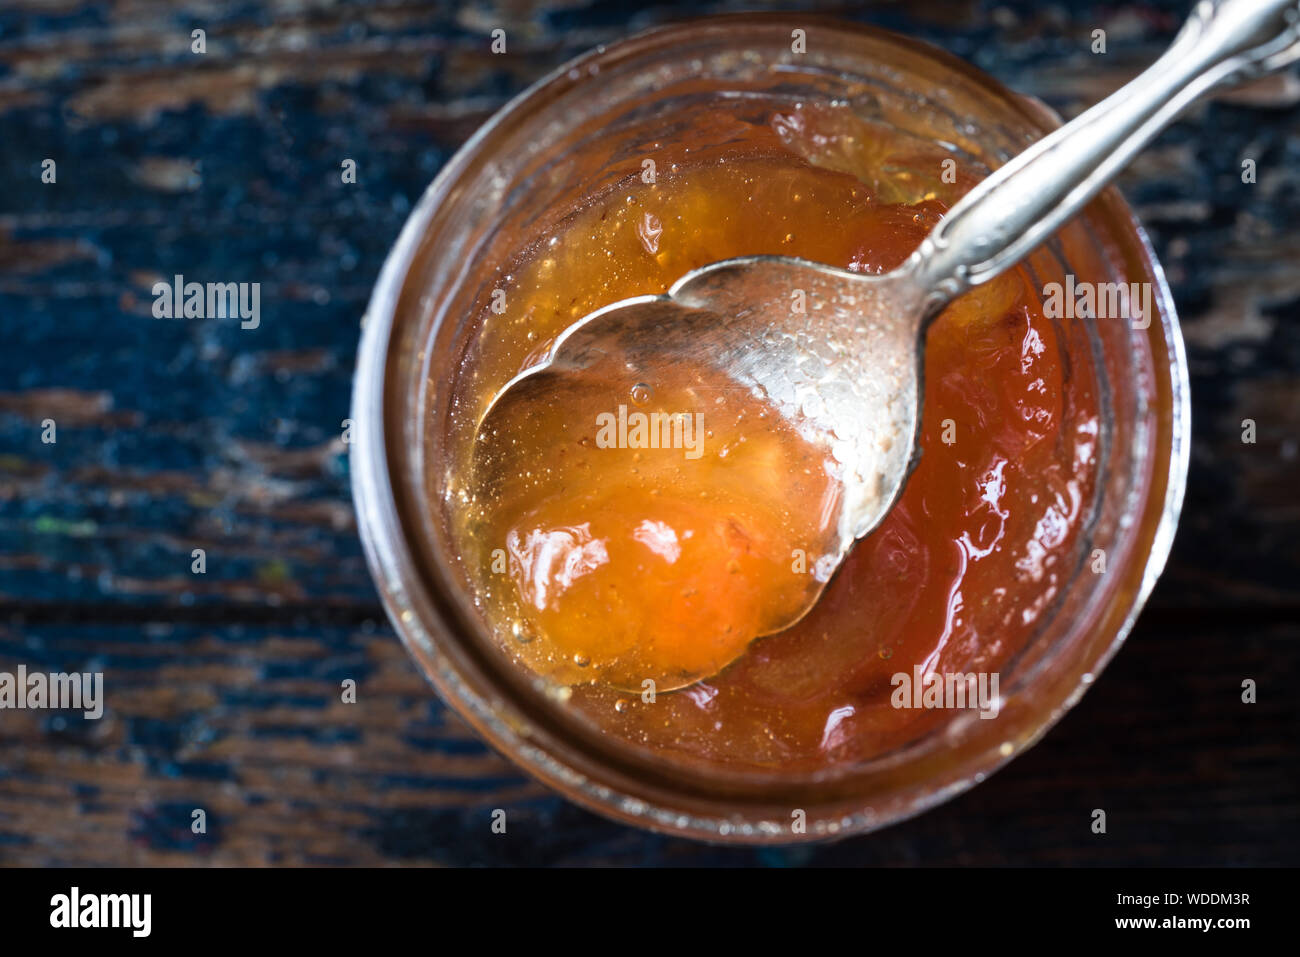 Directly Above Shot Of Stone Fruit Preserves In Jar On Wooden Table Stock Photo